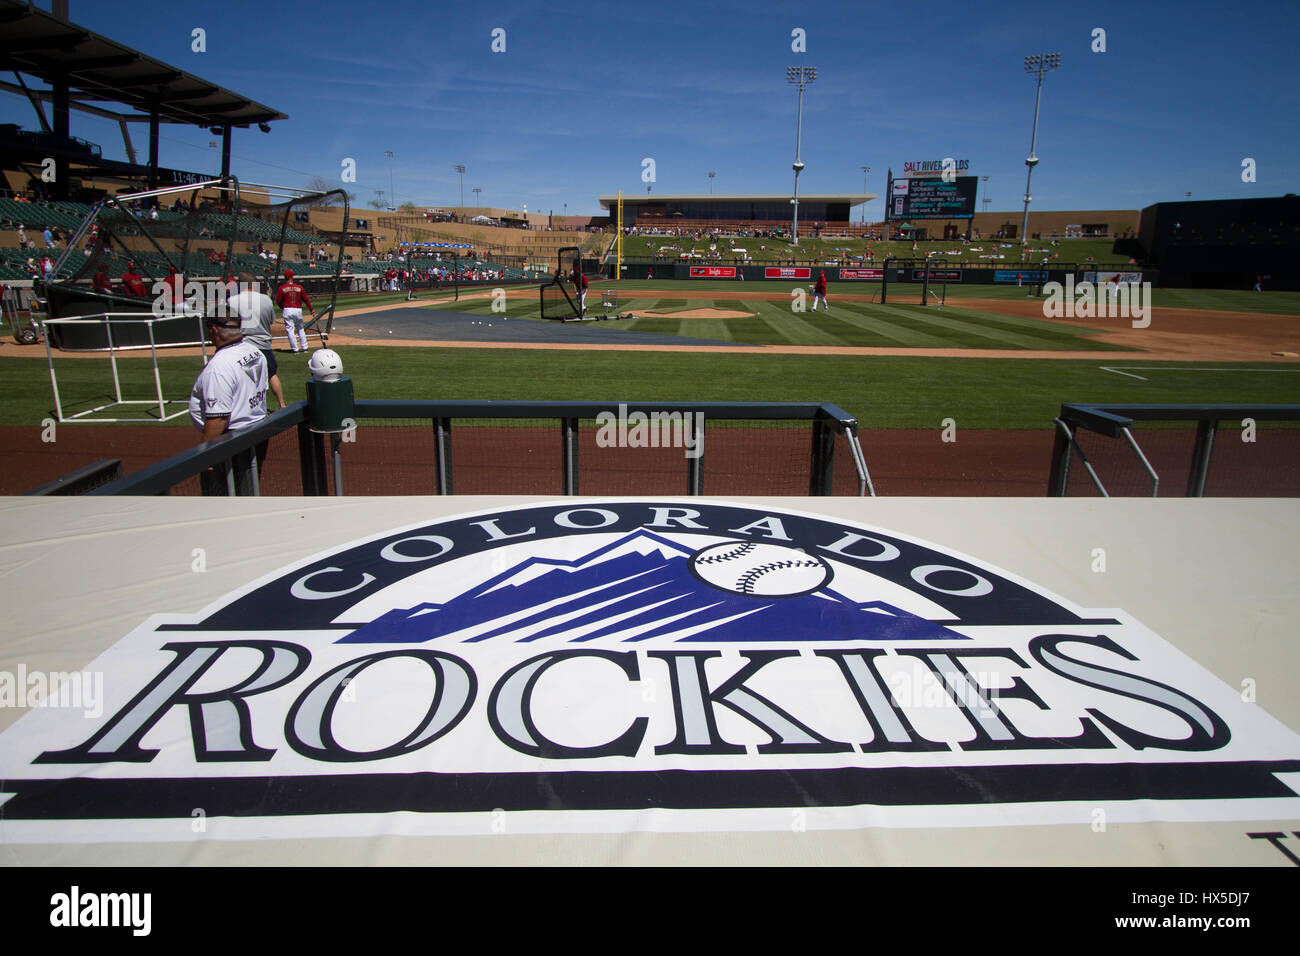 Aspects of Spring Training at the DiamondBacks and Rockies Stadium in Colorado prior to Major League Baseball's MLB Day in Scotdale Arizona. Stock Photo